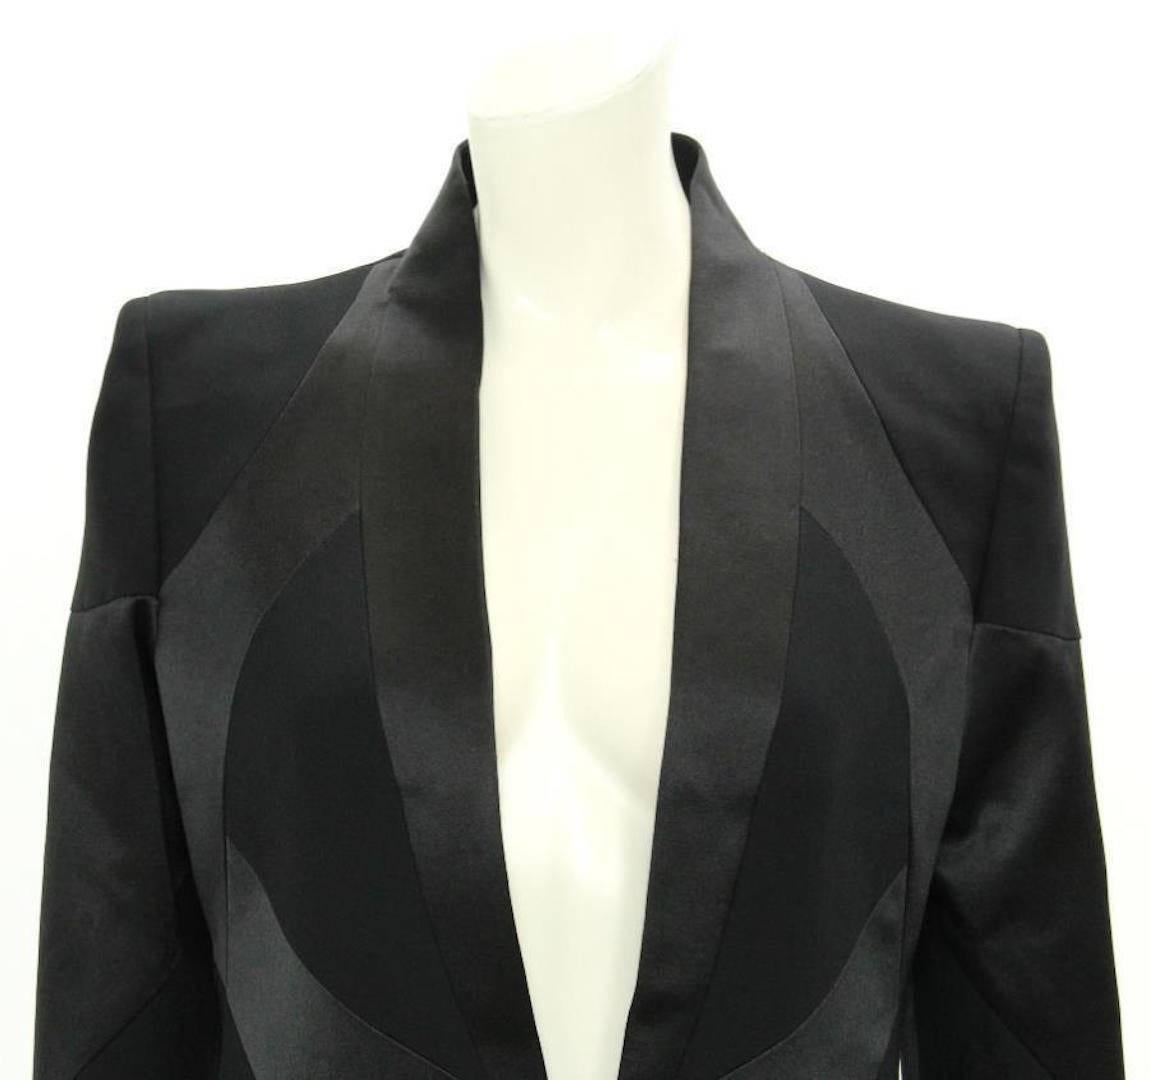 CURATOR'S NOTES

Incredible Alexander McQueen black blazer featuring silk paneling, shoulder padding, long sleeves, and single button closure.  Priced to sell.

Size 46
Fabrication 50% Silk, 25% Acetate, 25% Rayon
